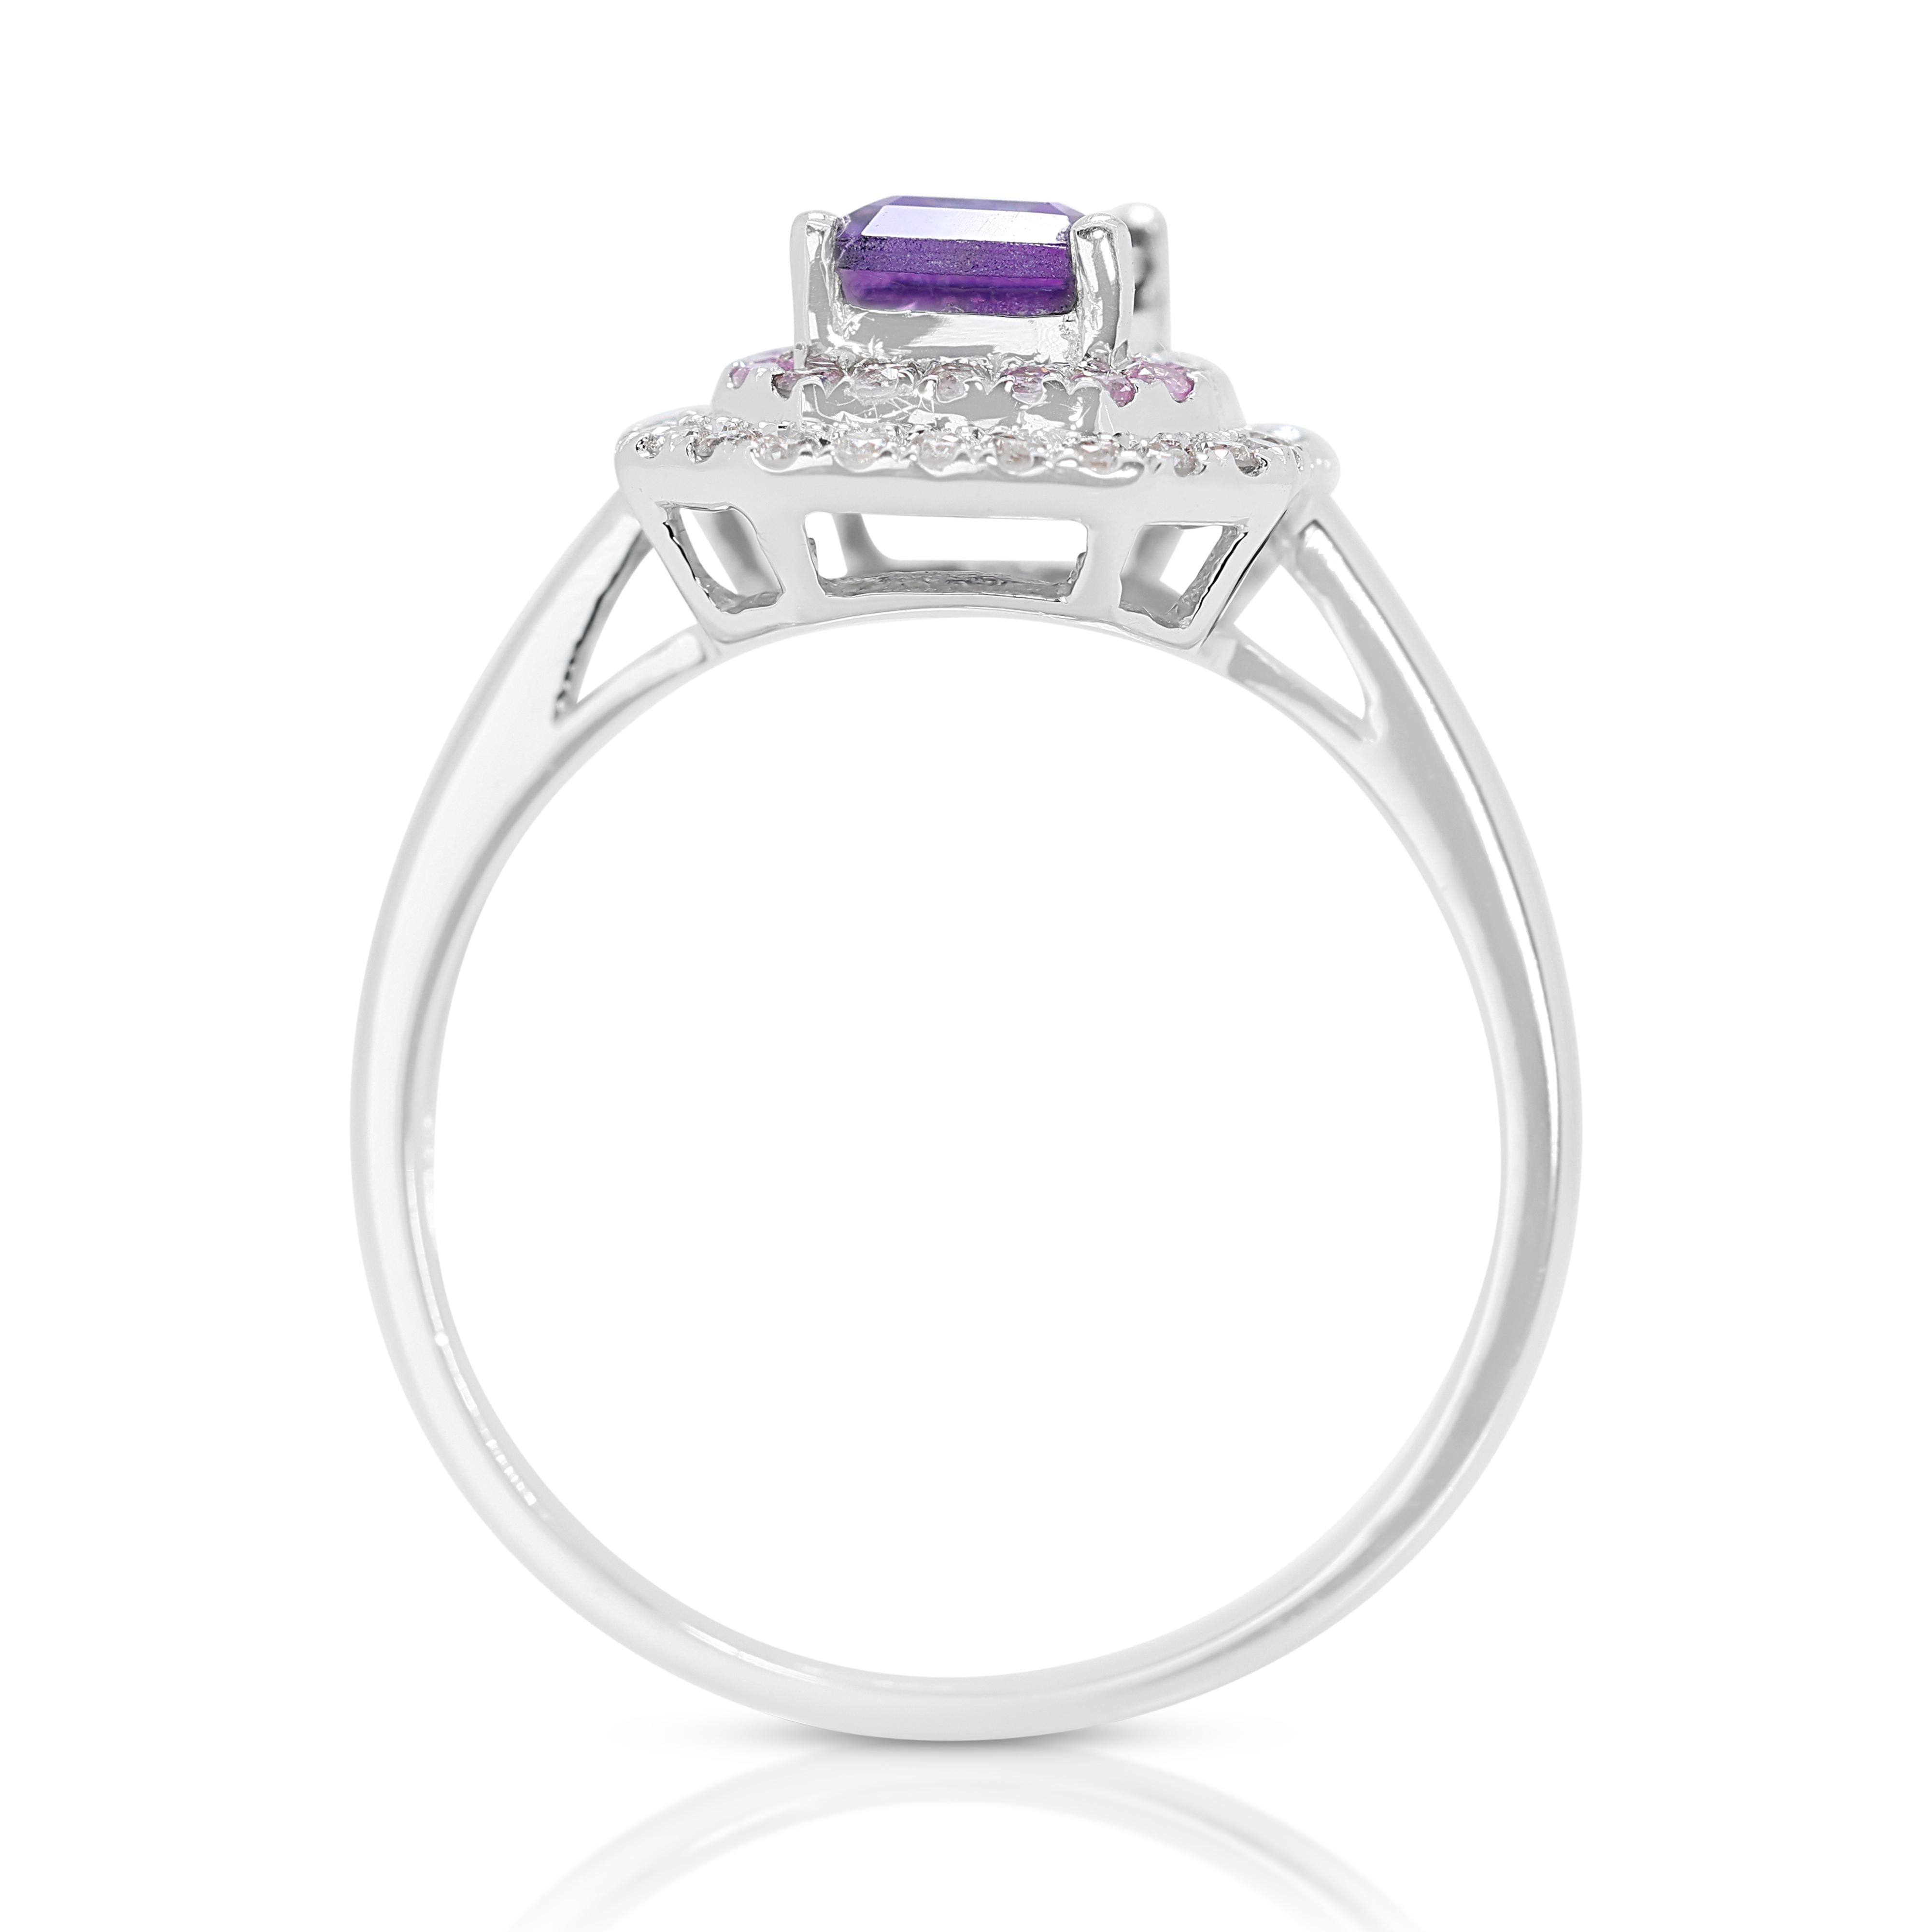 Stunning 1.35ct Amethyst Double Halo Ring with Gemstones and Diamonds 2